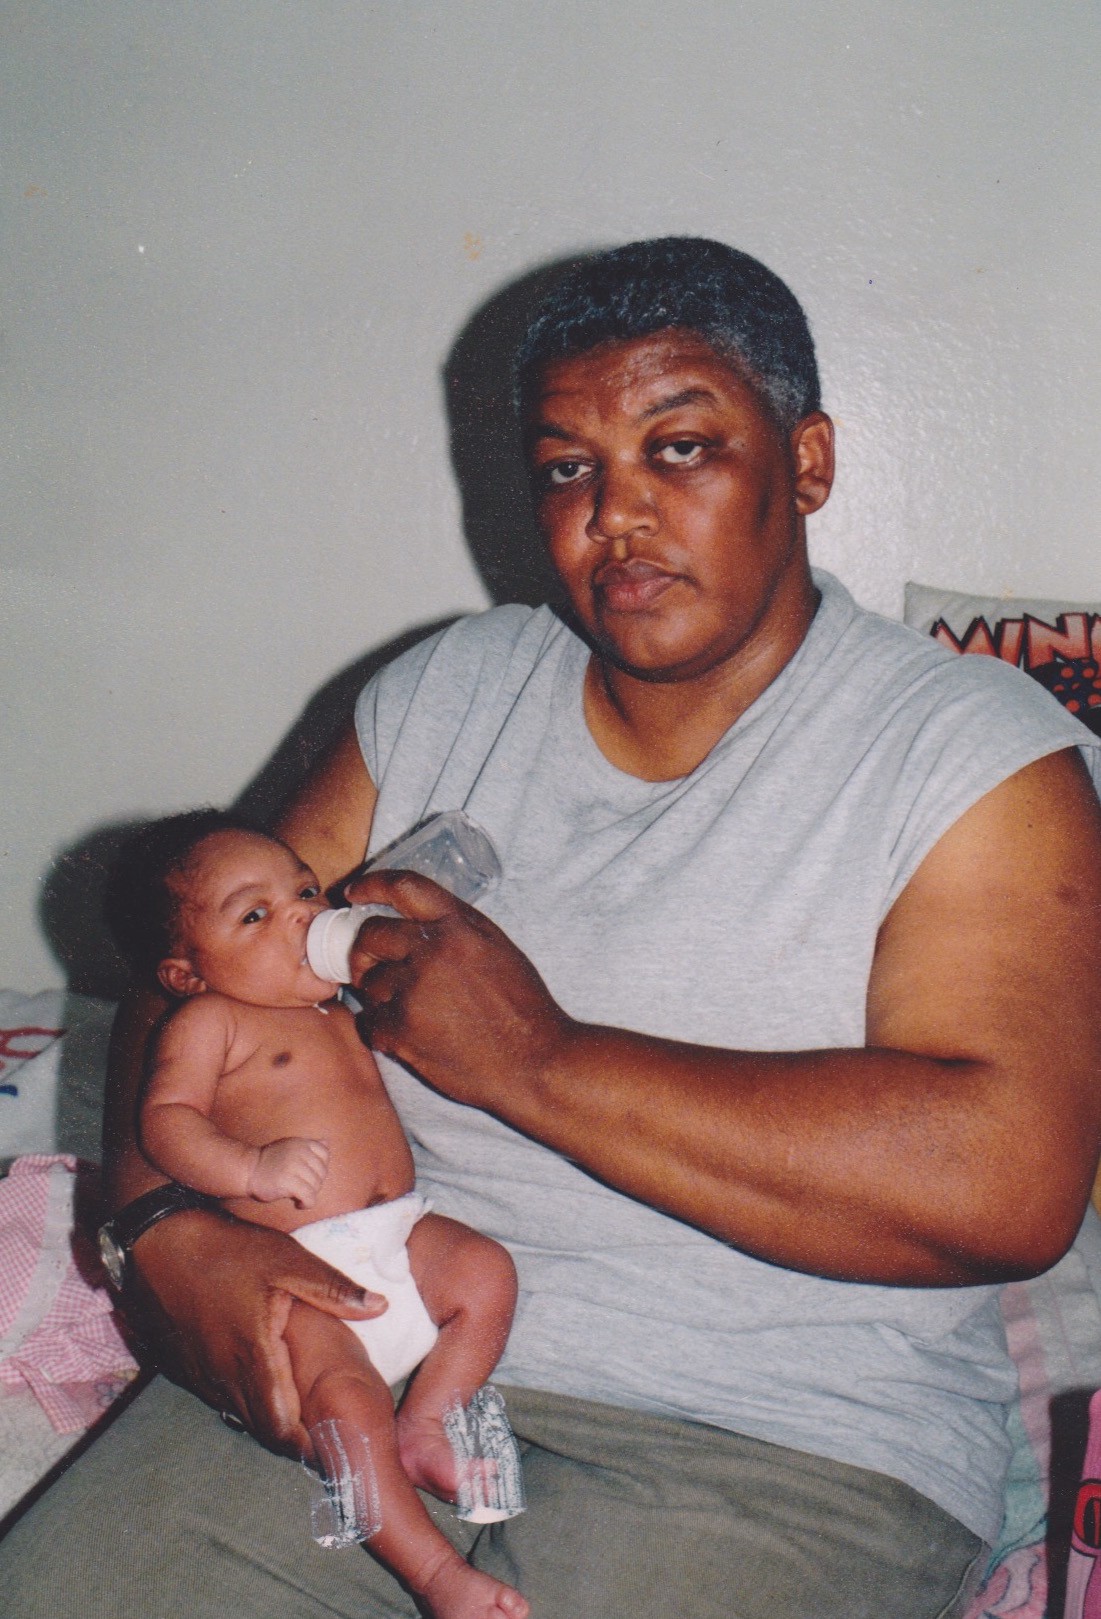 Starks with her grandmother. Photo courtesy of Aqeela Starks